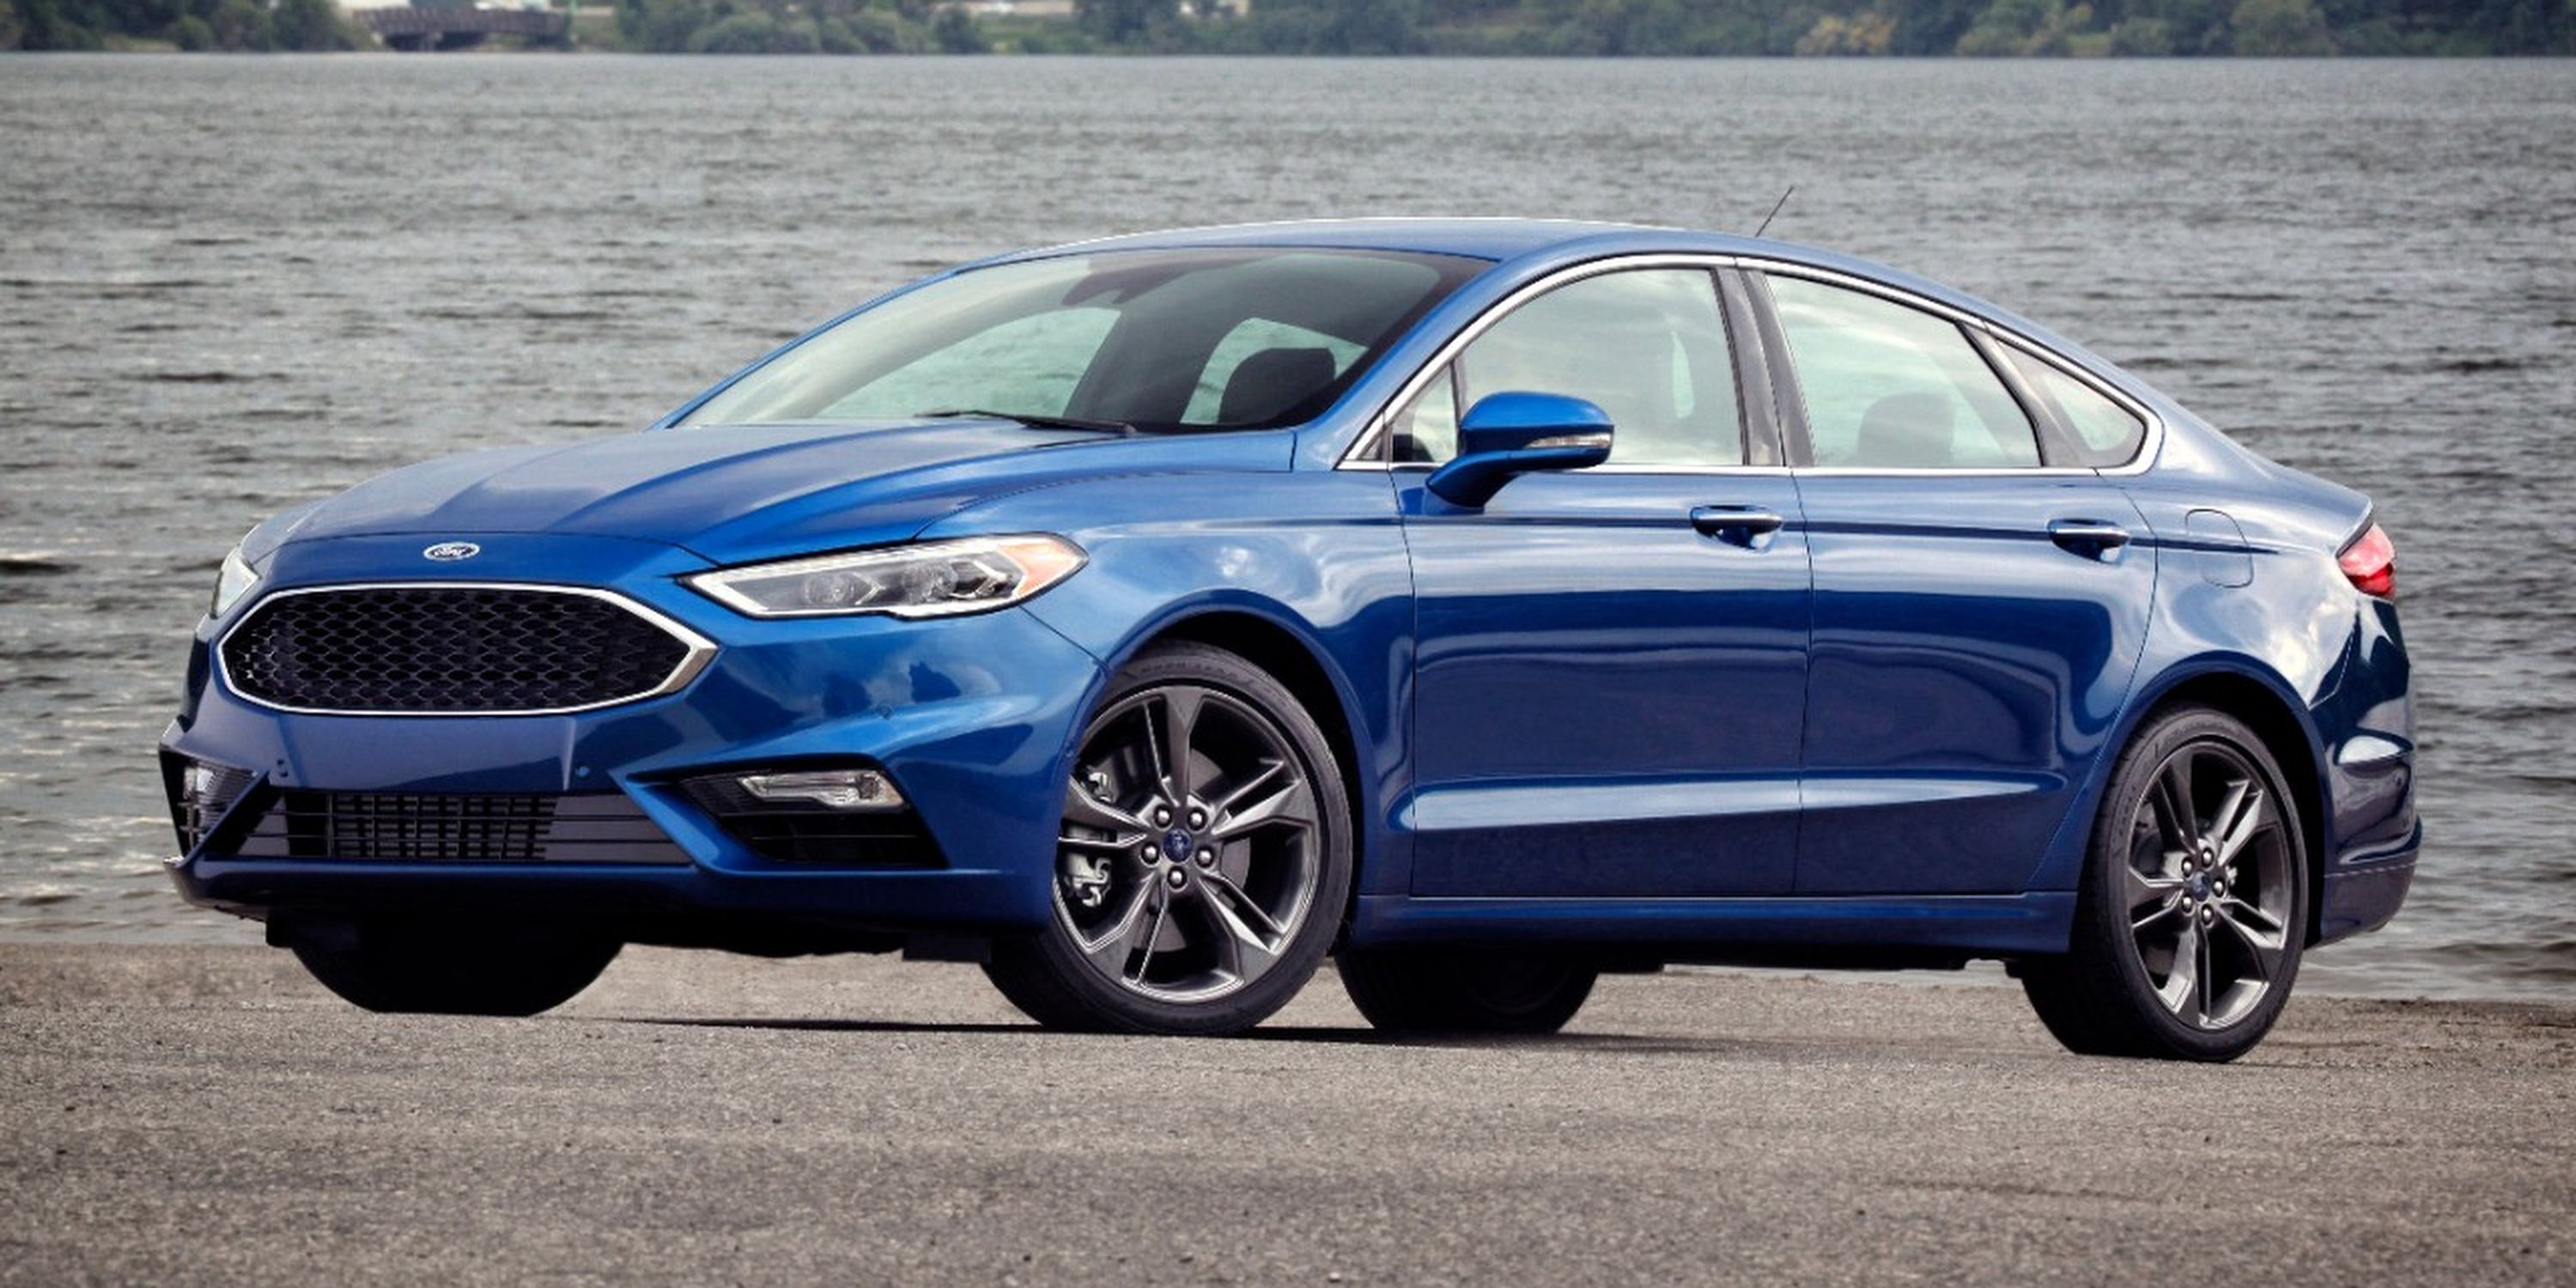 2017 Ford Fusion Sport Exterior (Blue)